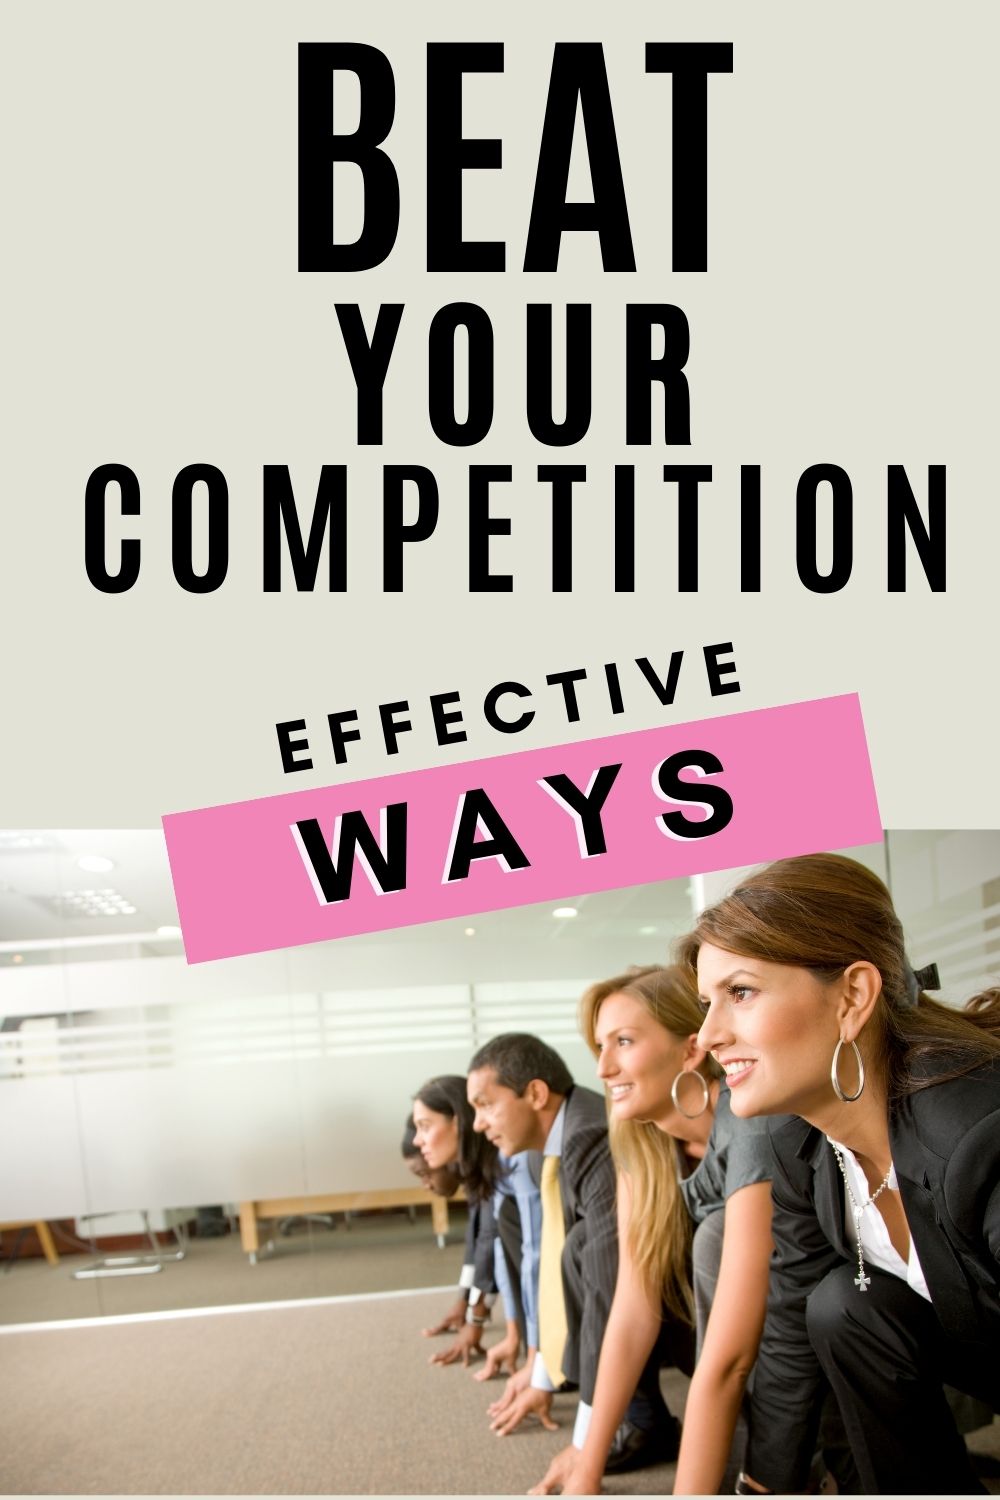 This blog post will discuss the most effective ways to beat your competition and succeed in today's market!